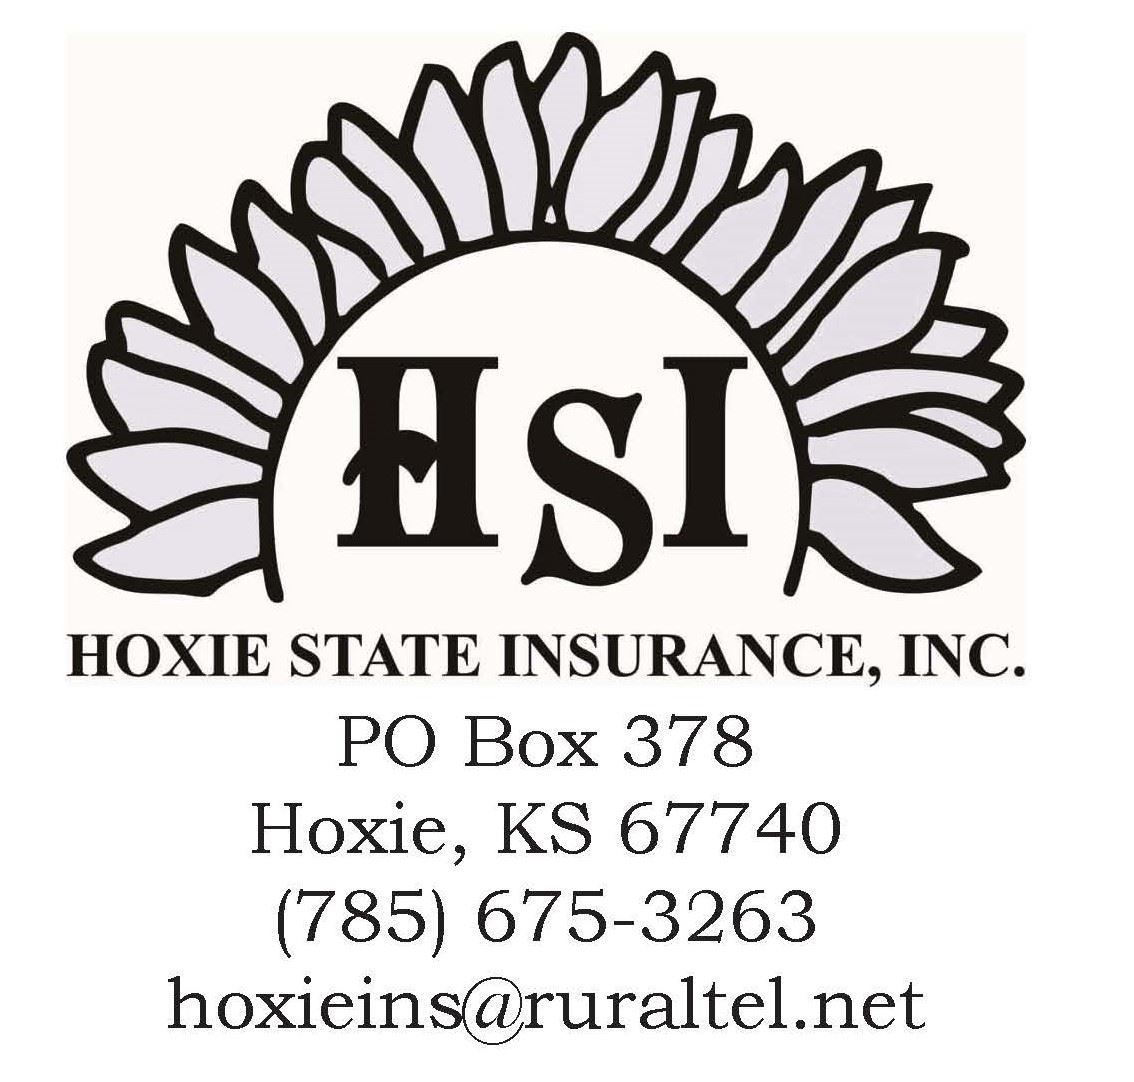 Hoxie State Insurance